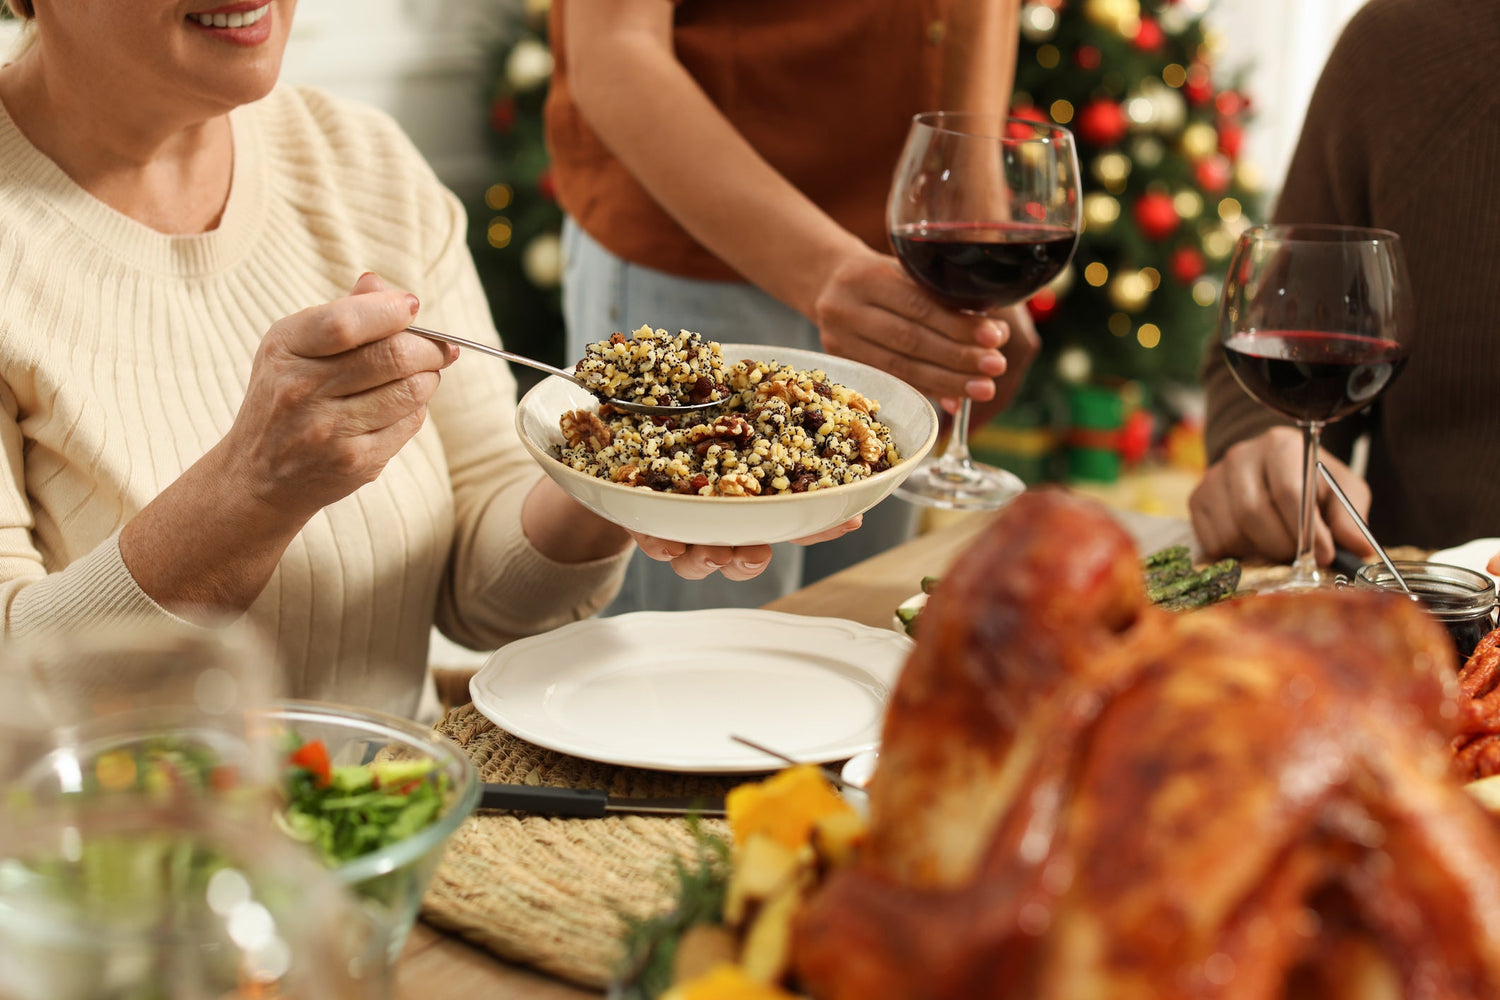 Tips for a Healthier Christmas: Mindful Habits to Stay on Track